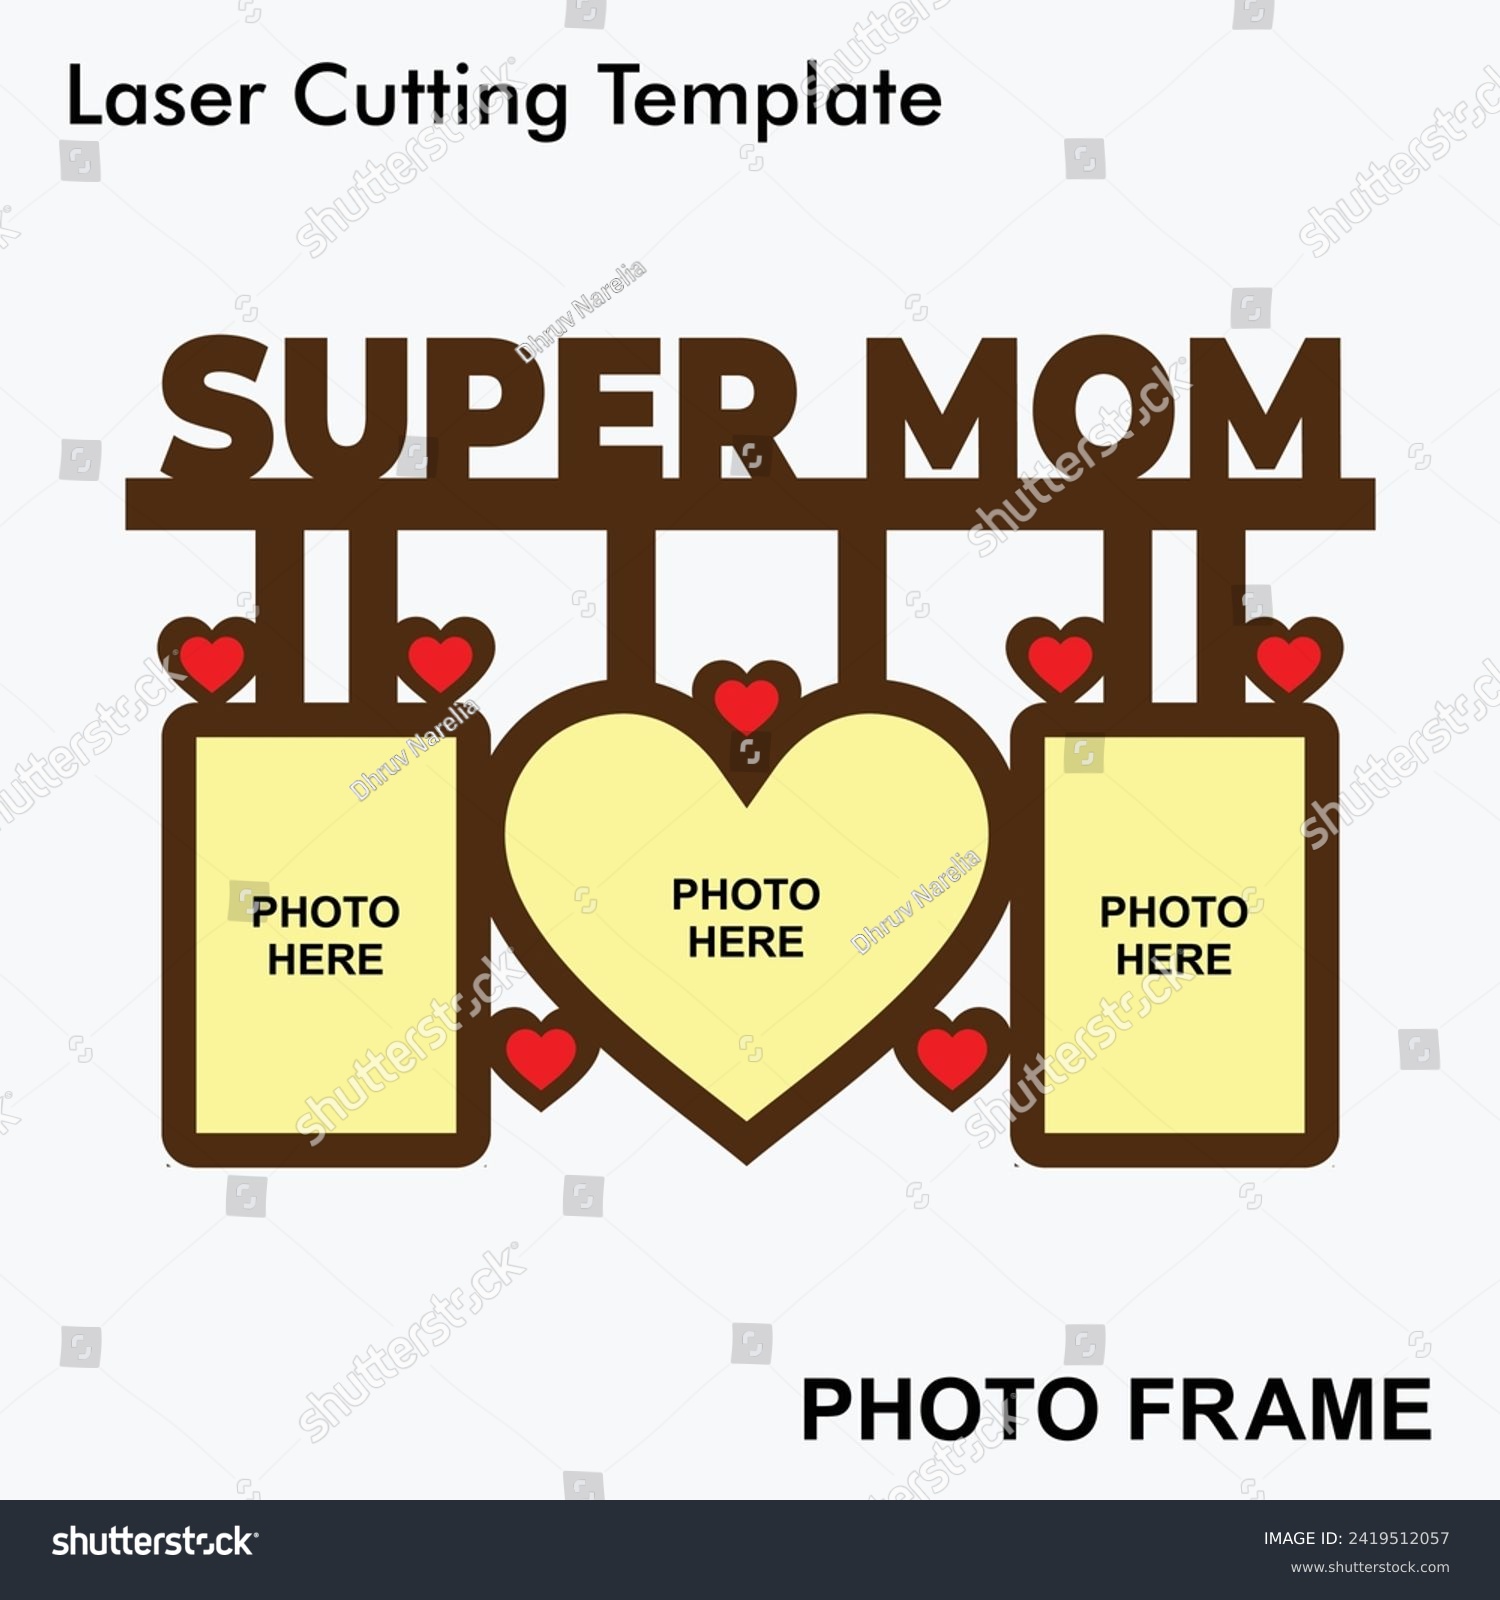 SVG of Super Mom laser cut photo frame with 3 photos. Best gift idea for mother. Laser cut photo frame mockup template design for mdf and acrylic cutting. Sublimation photo frame template. svg